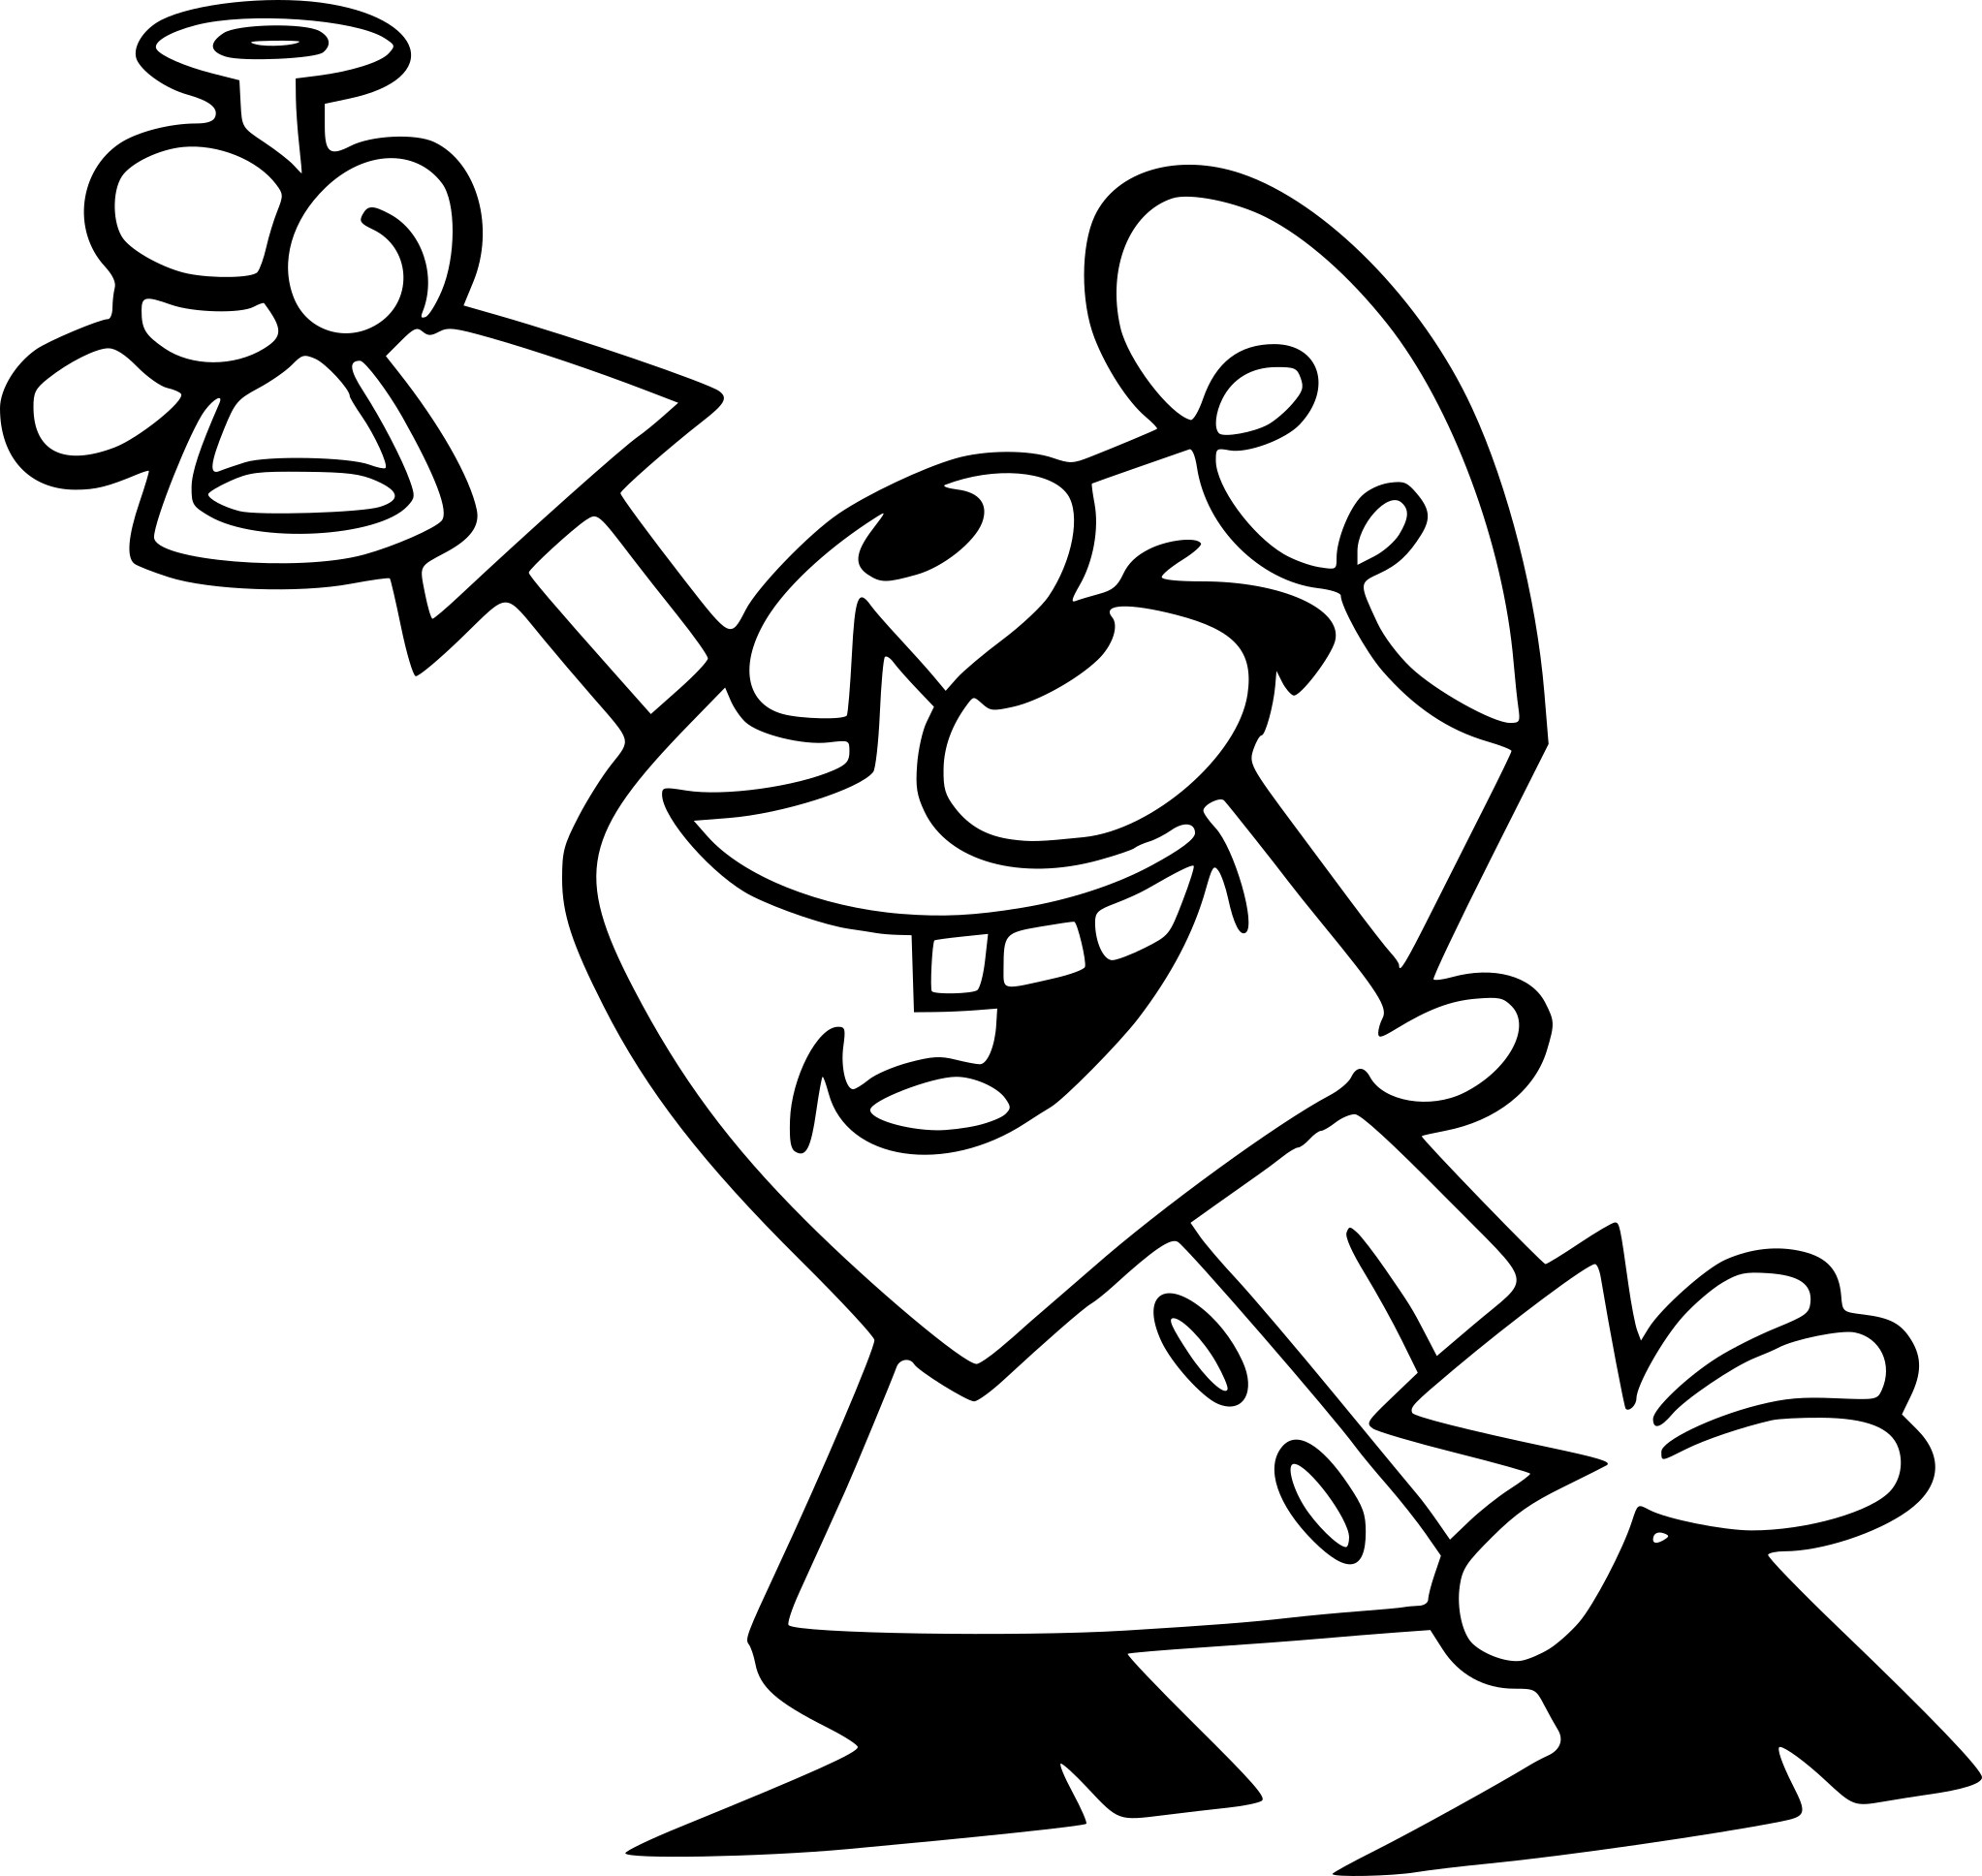 Dexters Laboratory coloring page